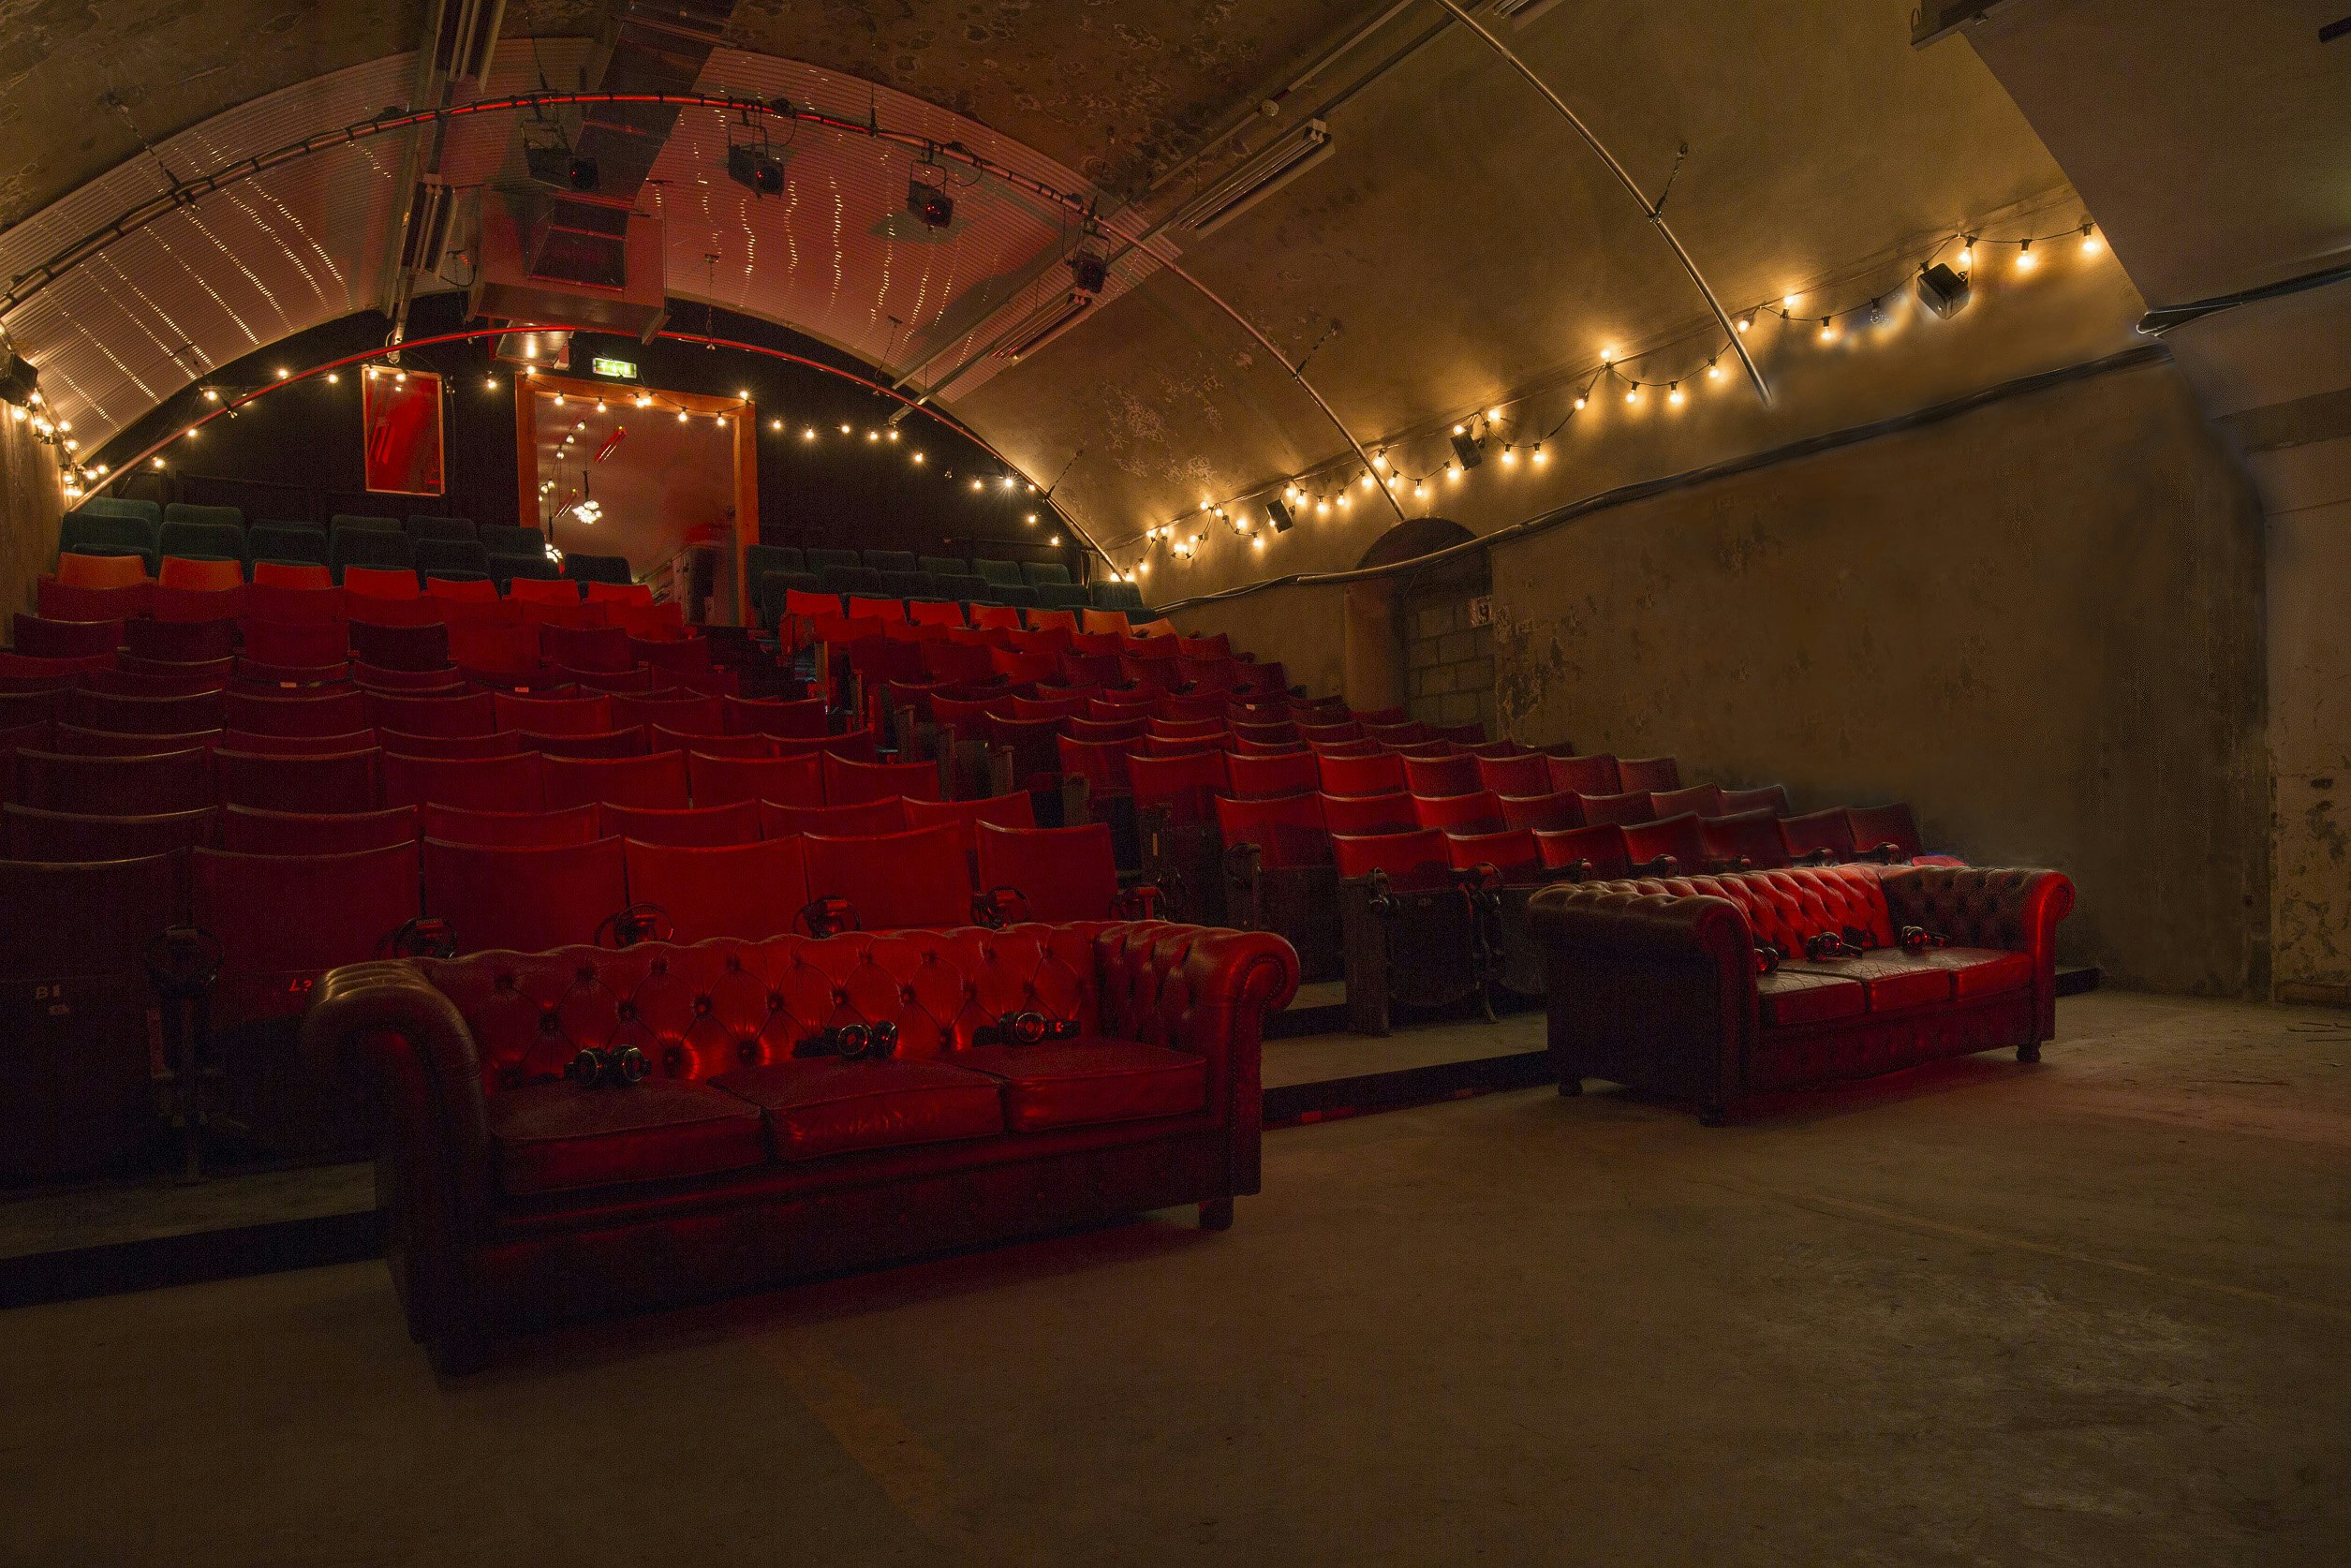 The Vaults - The Vaults Theatre image 8